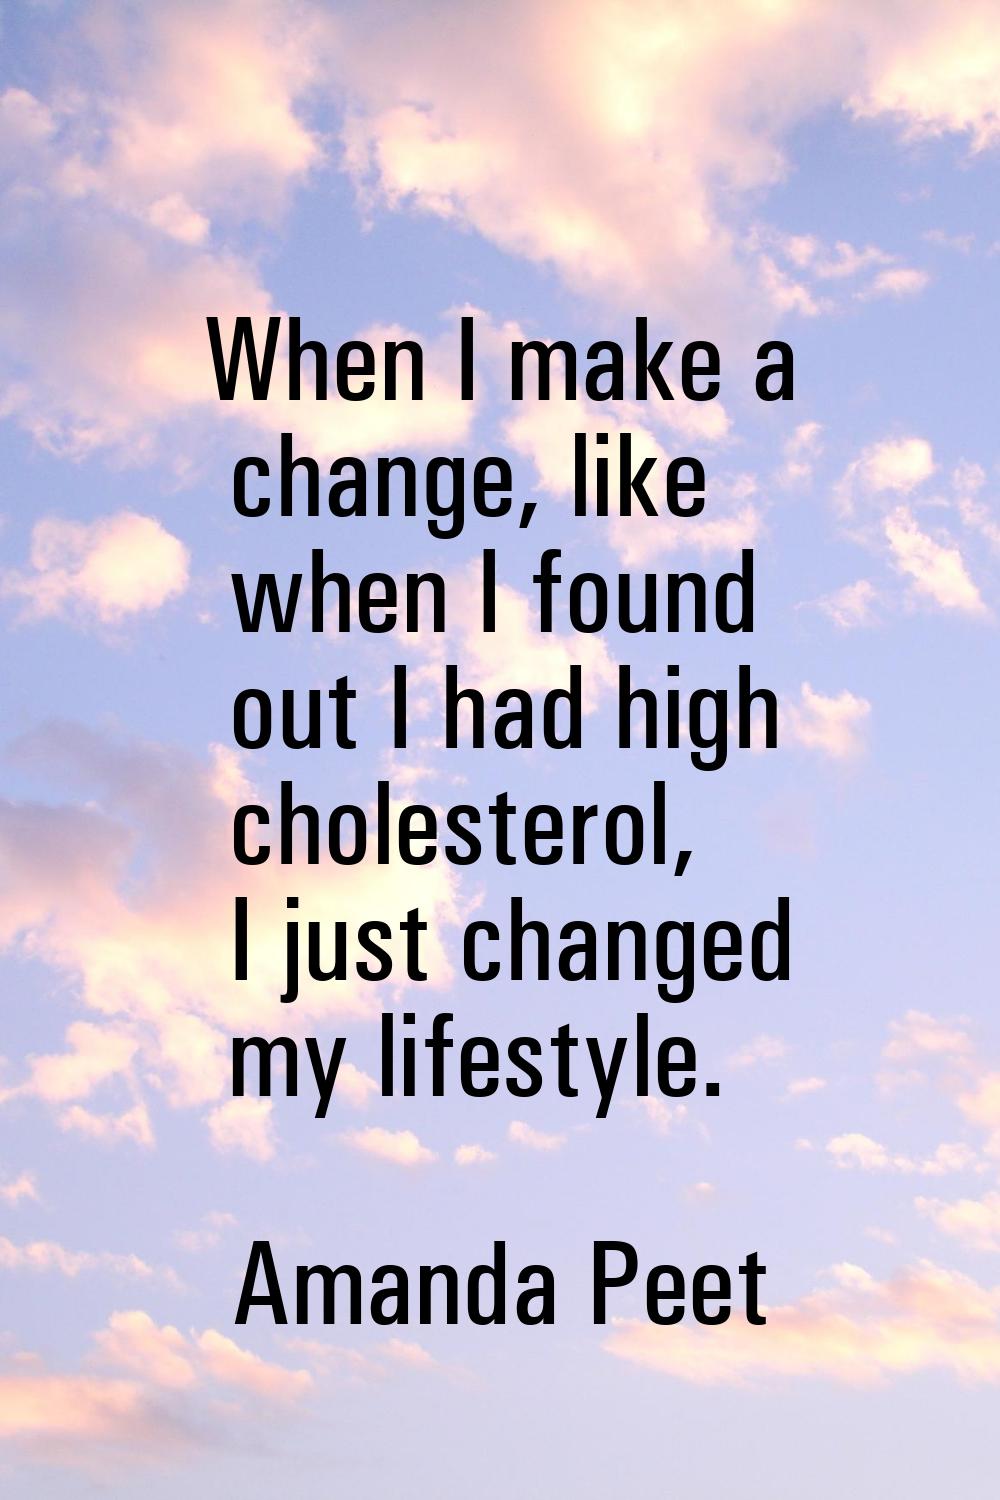 When I make a change, like when I found out I had high cholesterol, I just changed my lifestyle.